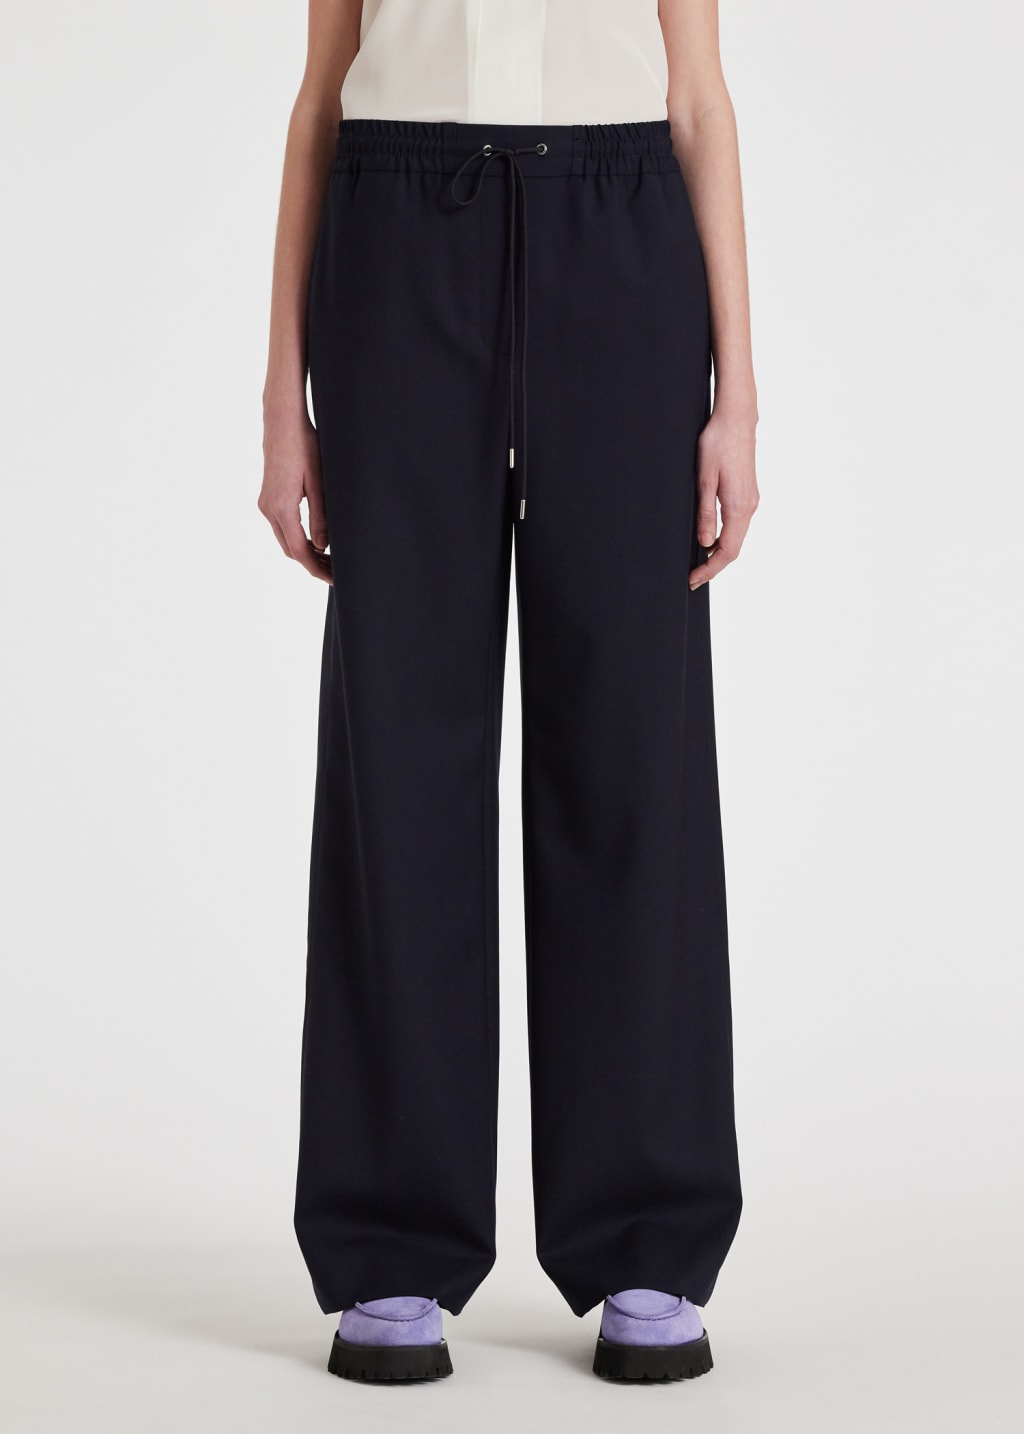 Model View - A Suit To Travel In - Navy Drawstring Wide Leg Trousers by Paul Smith